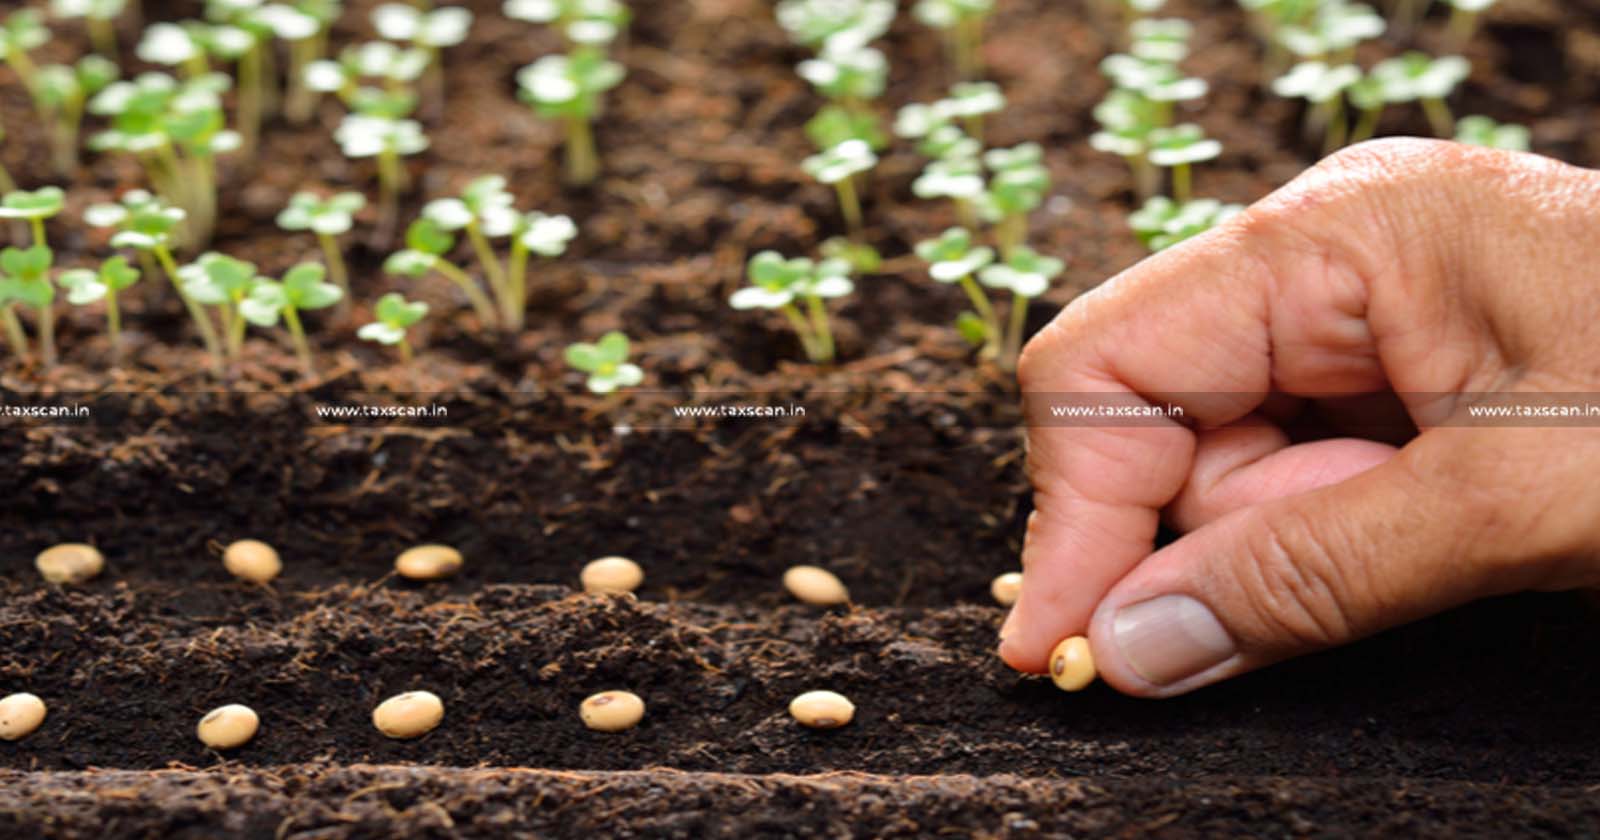 Production of Foundation Seeds - Foundation Seeds - Agricultural Activity - Income Tax Exemption - ITAT - taxscan